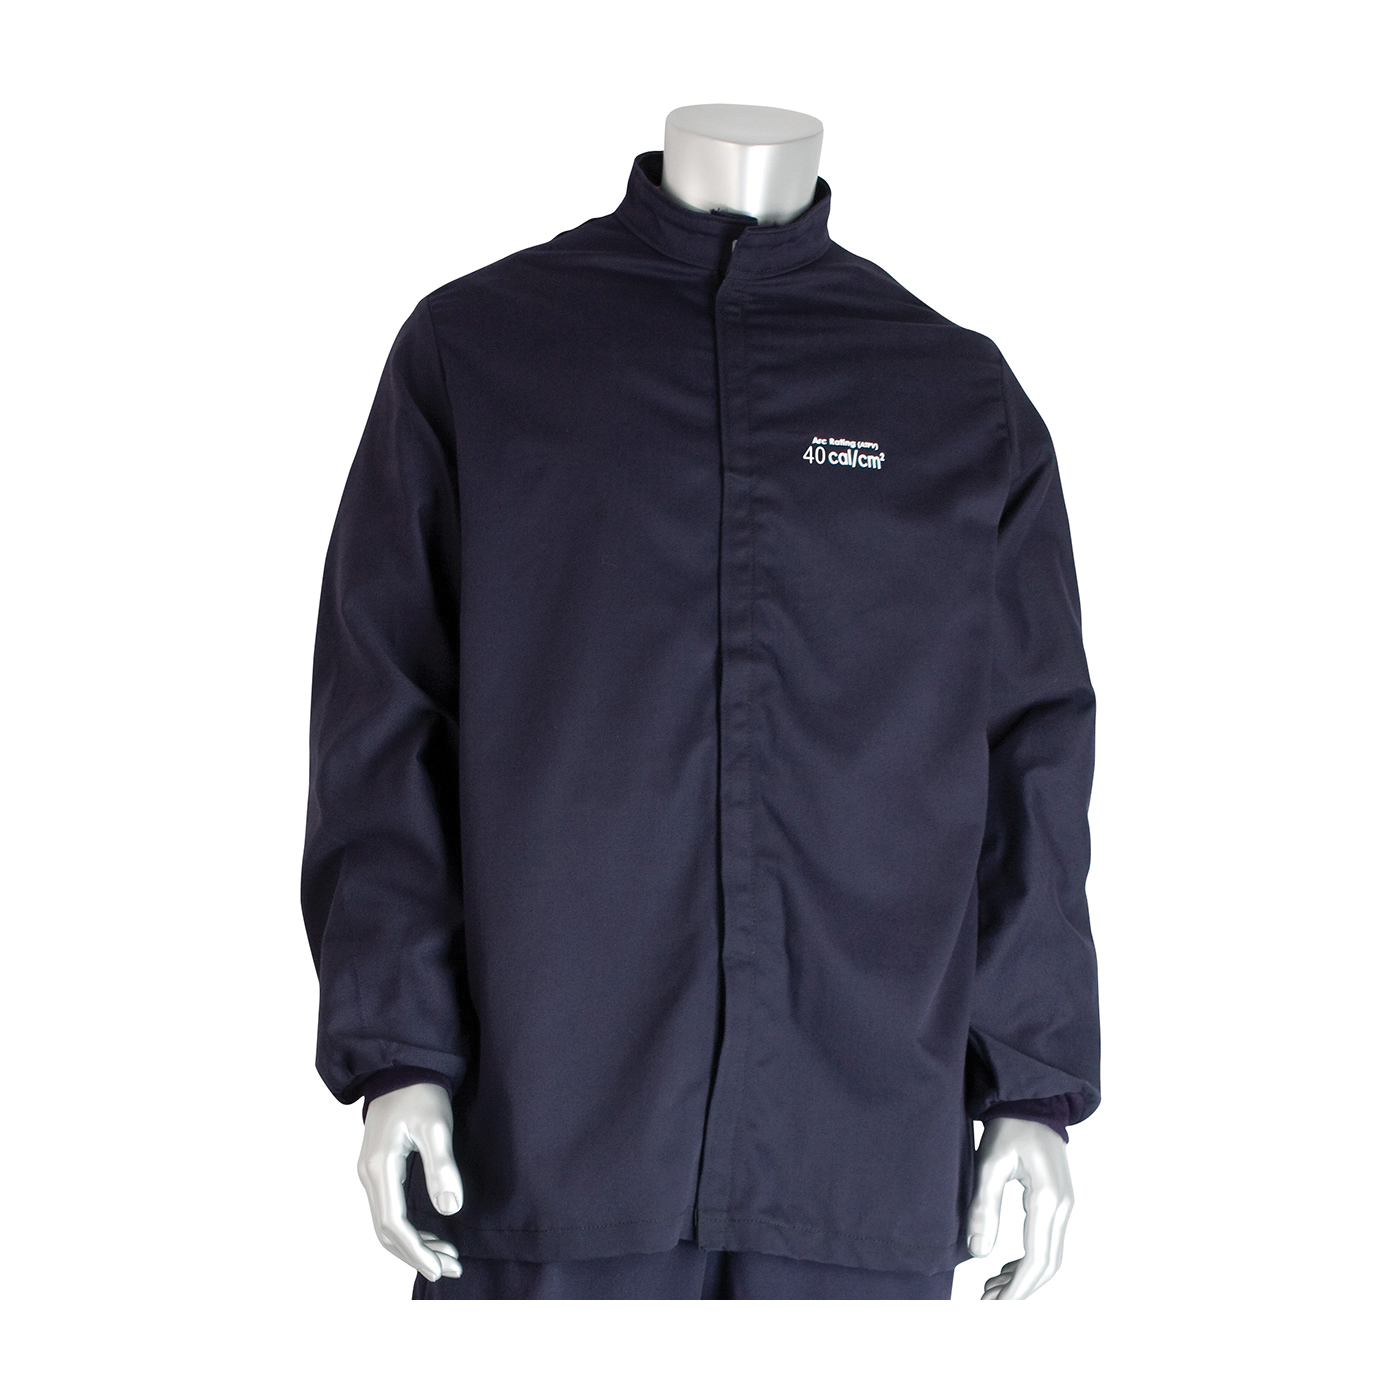 PIP® 9100-52412/M Arc and Flame Resistant Jacket, M, Navy, Westex® UltraSoft® 88% Cotton 12% High Tenacity Nylon, 40 to 42 in Chest, Resists: Arc and Flame, ASTM F1506-10a, ASTM F2178-12